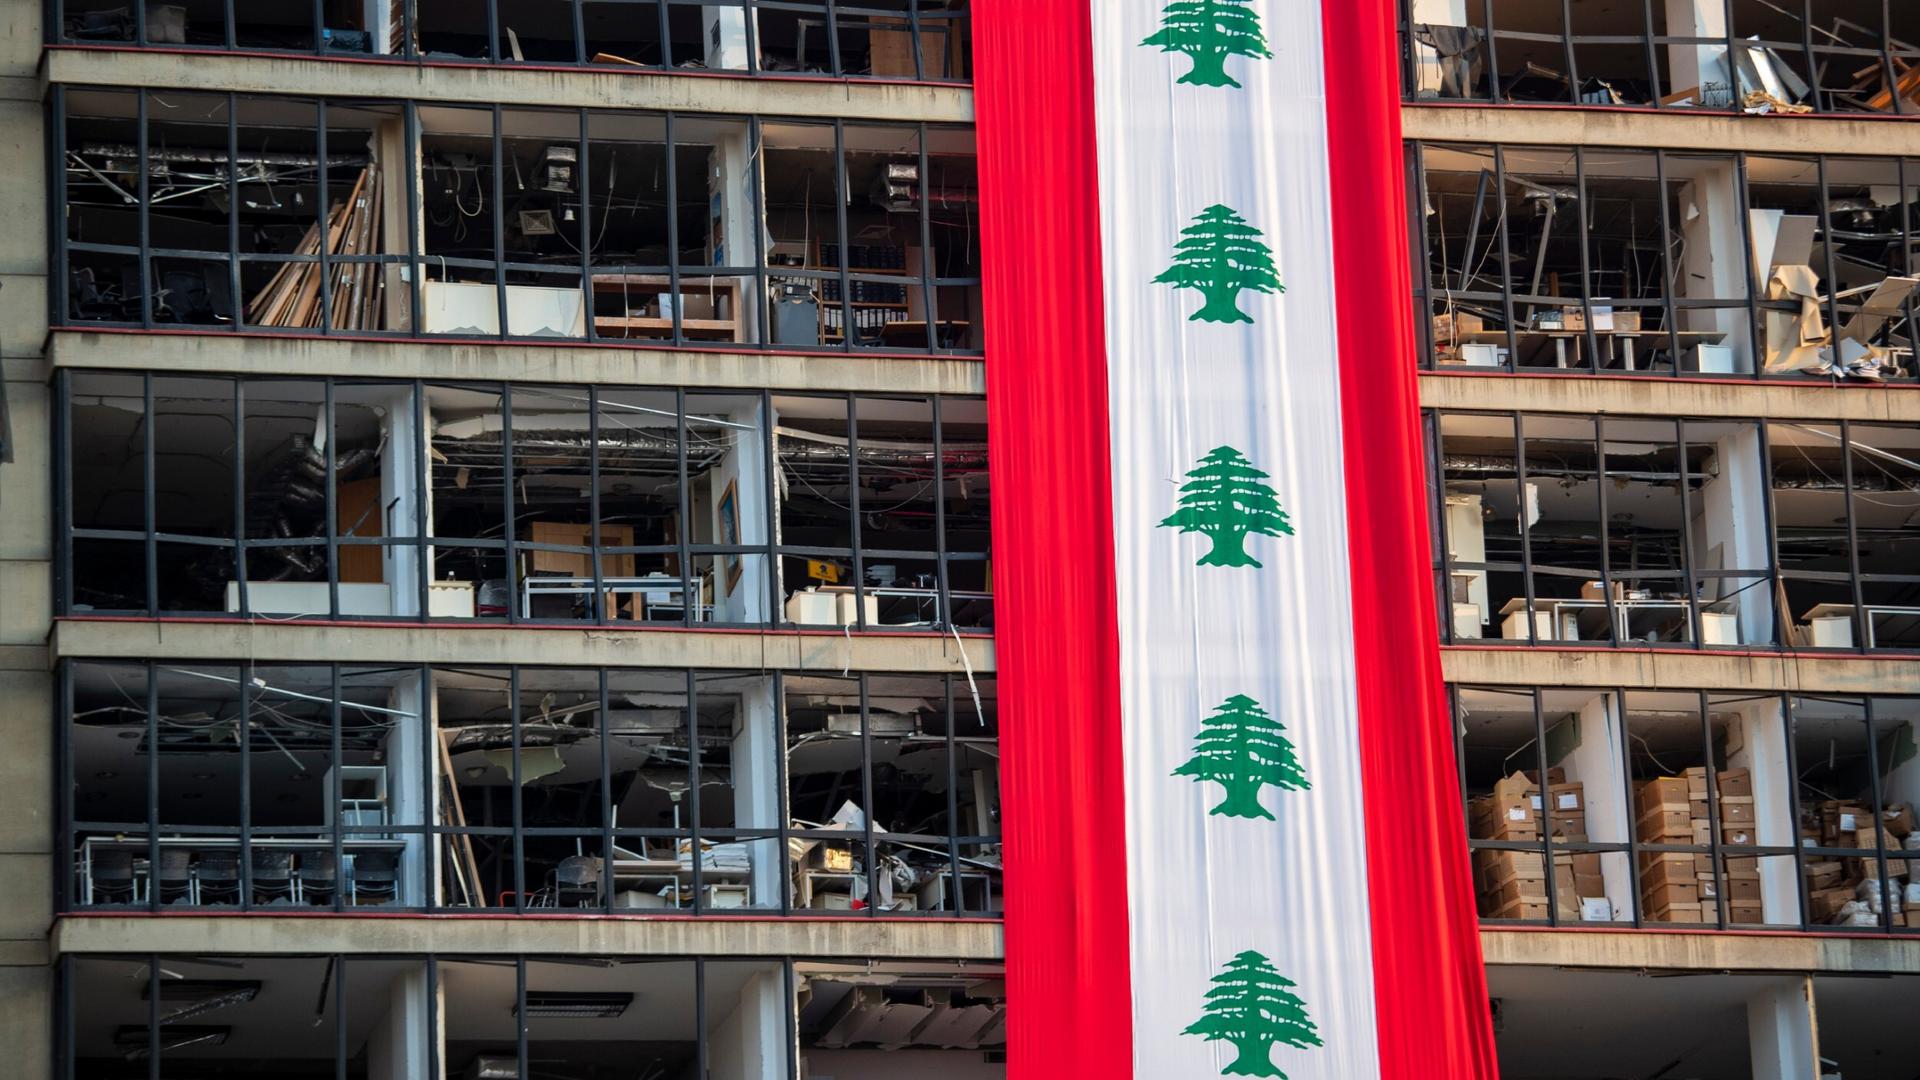 A banner with representations of the Lebanese flag hangs on a damaged building in a neighborhood near the site of the explosion